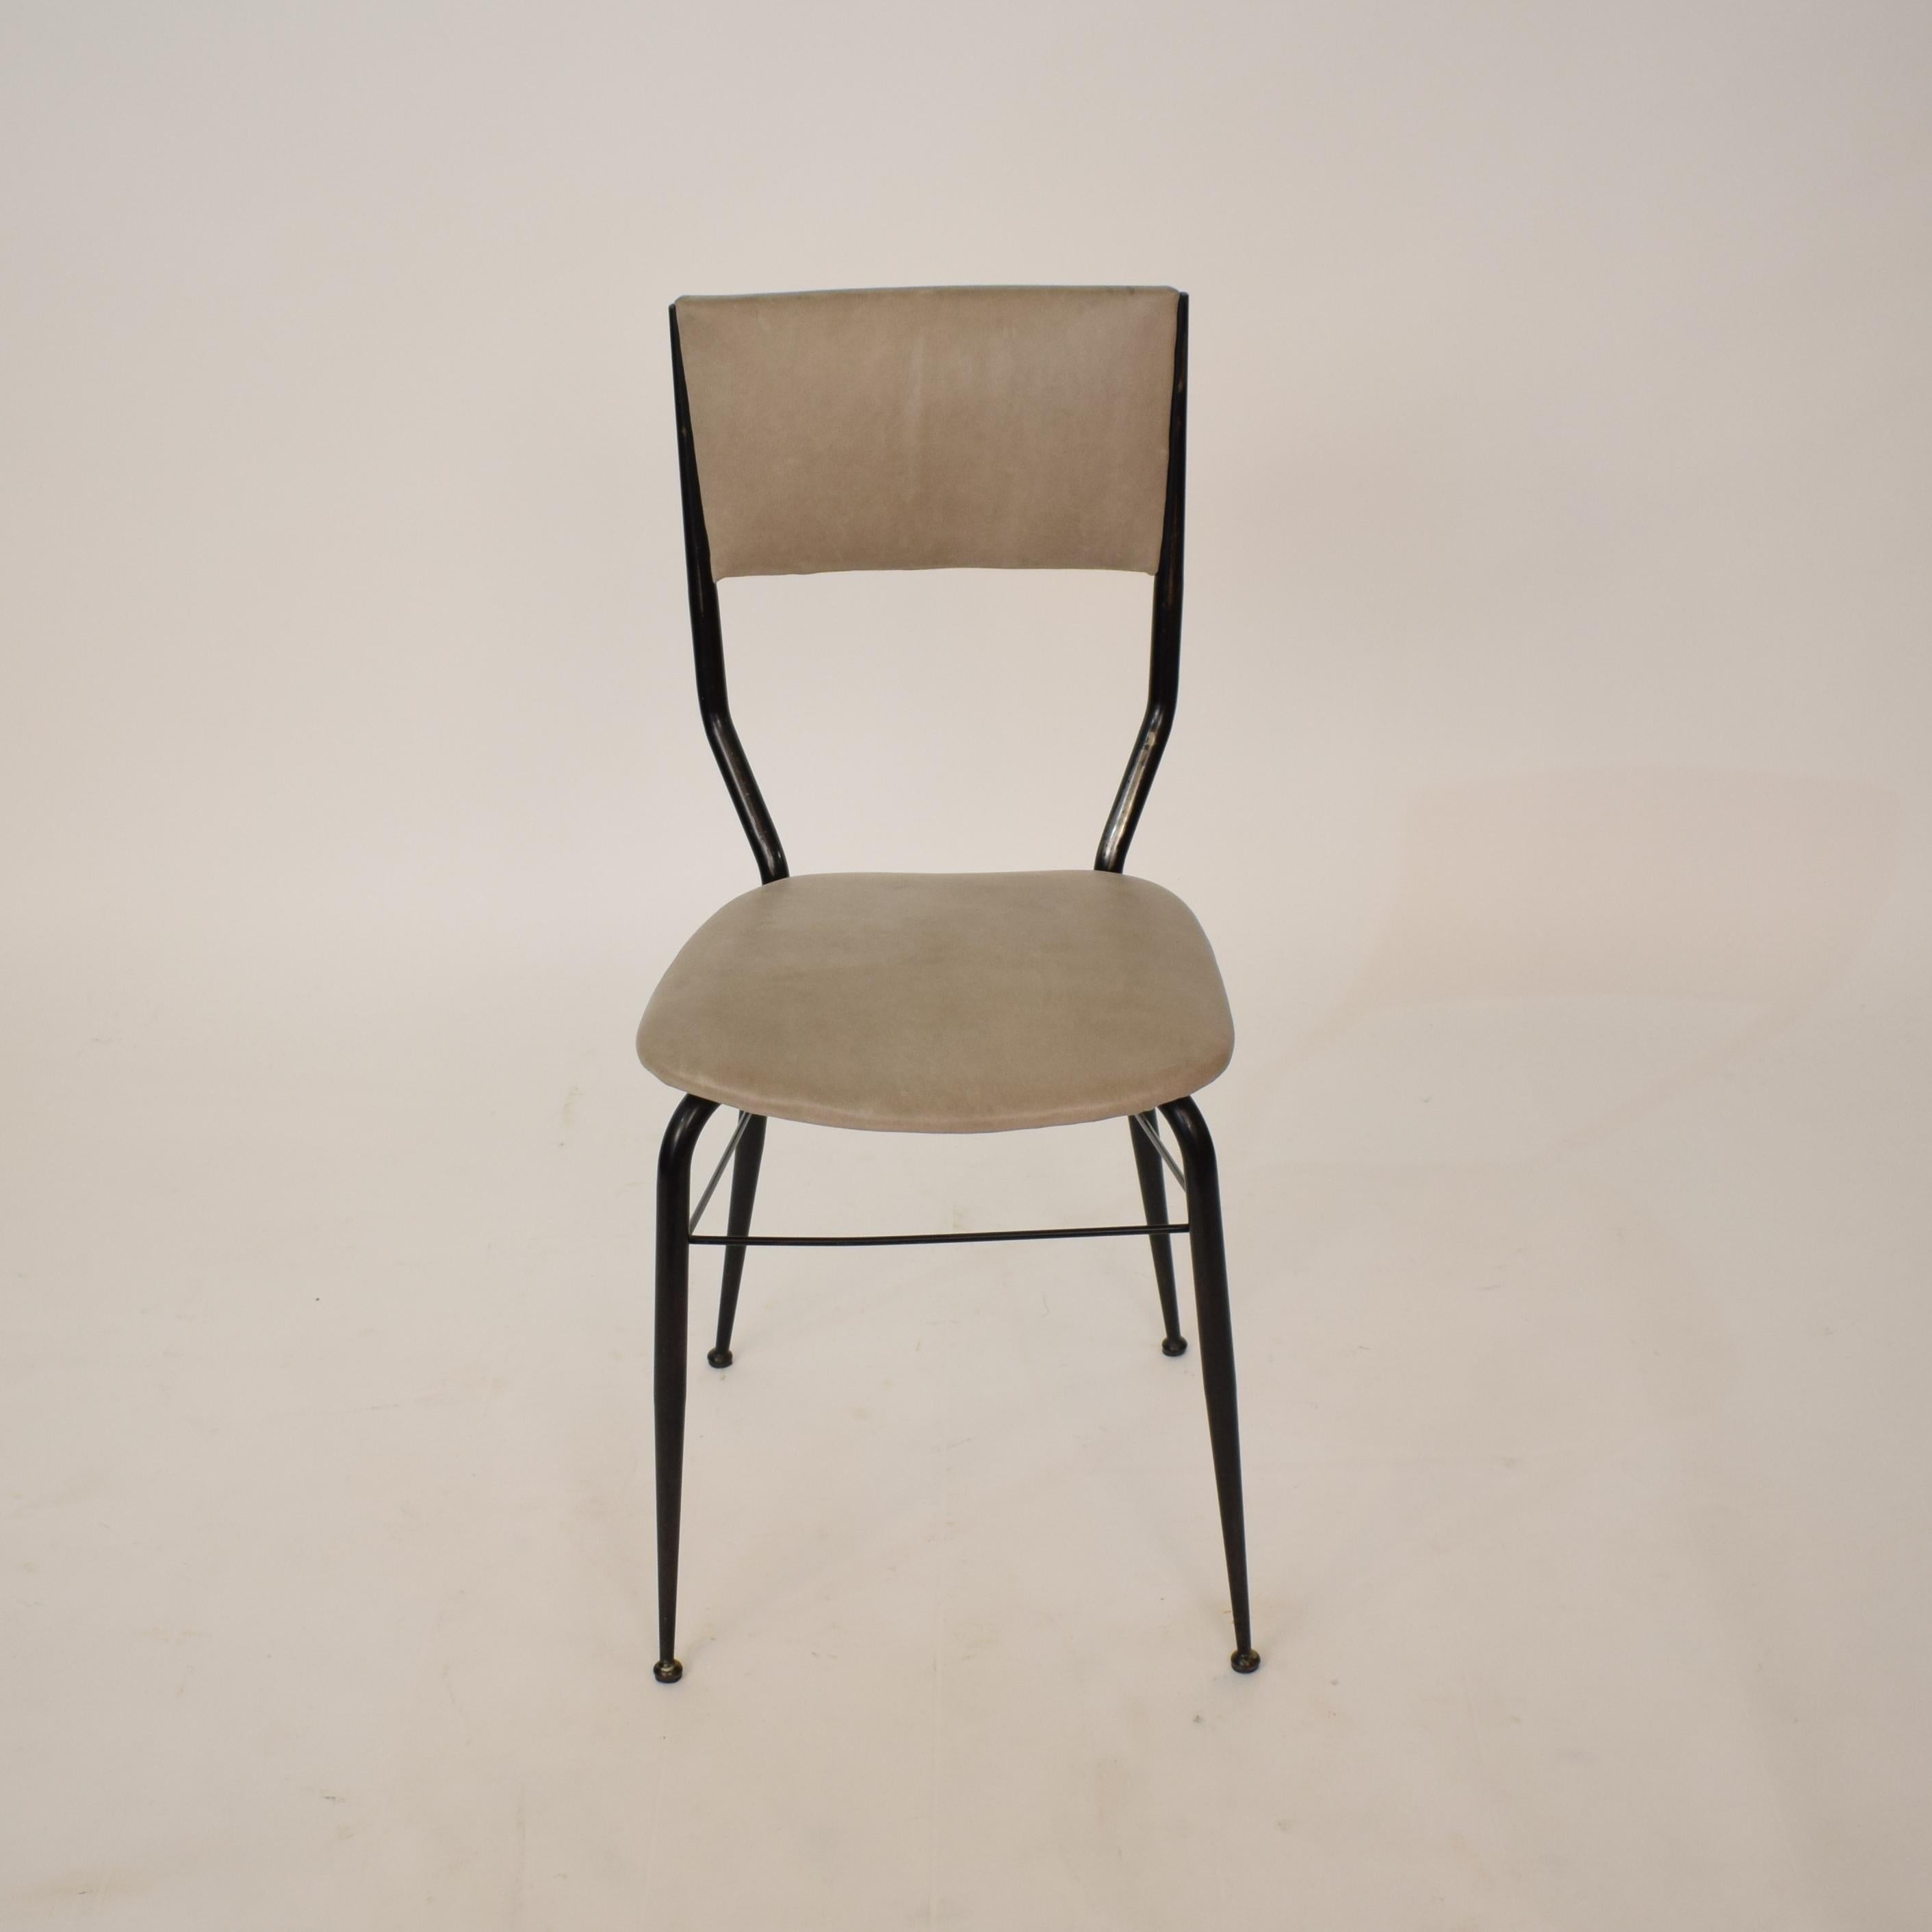 This Midcentury dining chairs from the 1950s was designed and manufactured in Italy. The chair consist of an elegant black metal frame and a padded grey leather seat and backrest. The chair has been newly reupholstered in gray leather. 
A unique